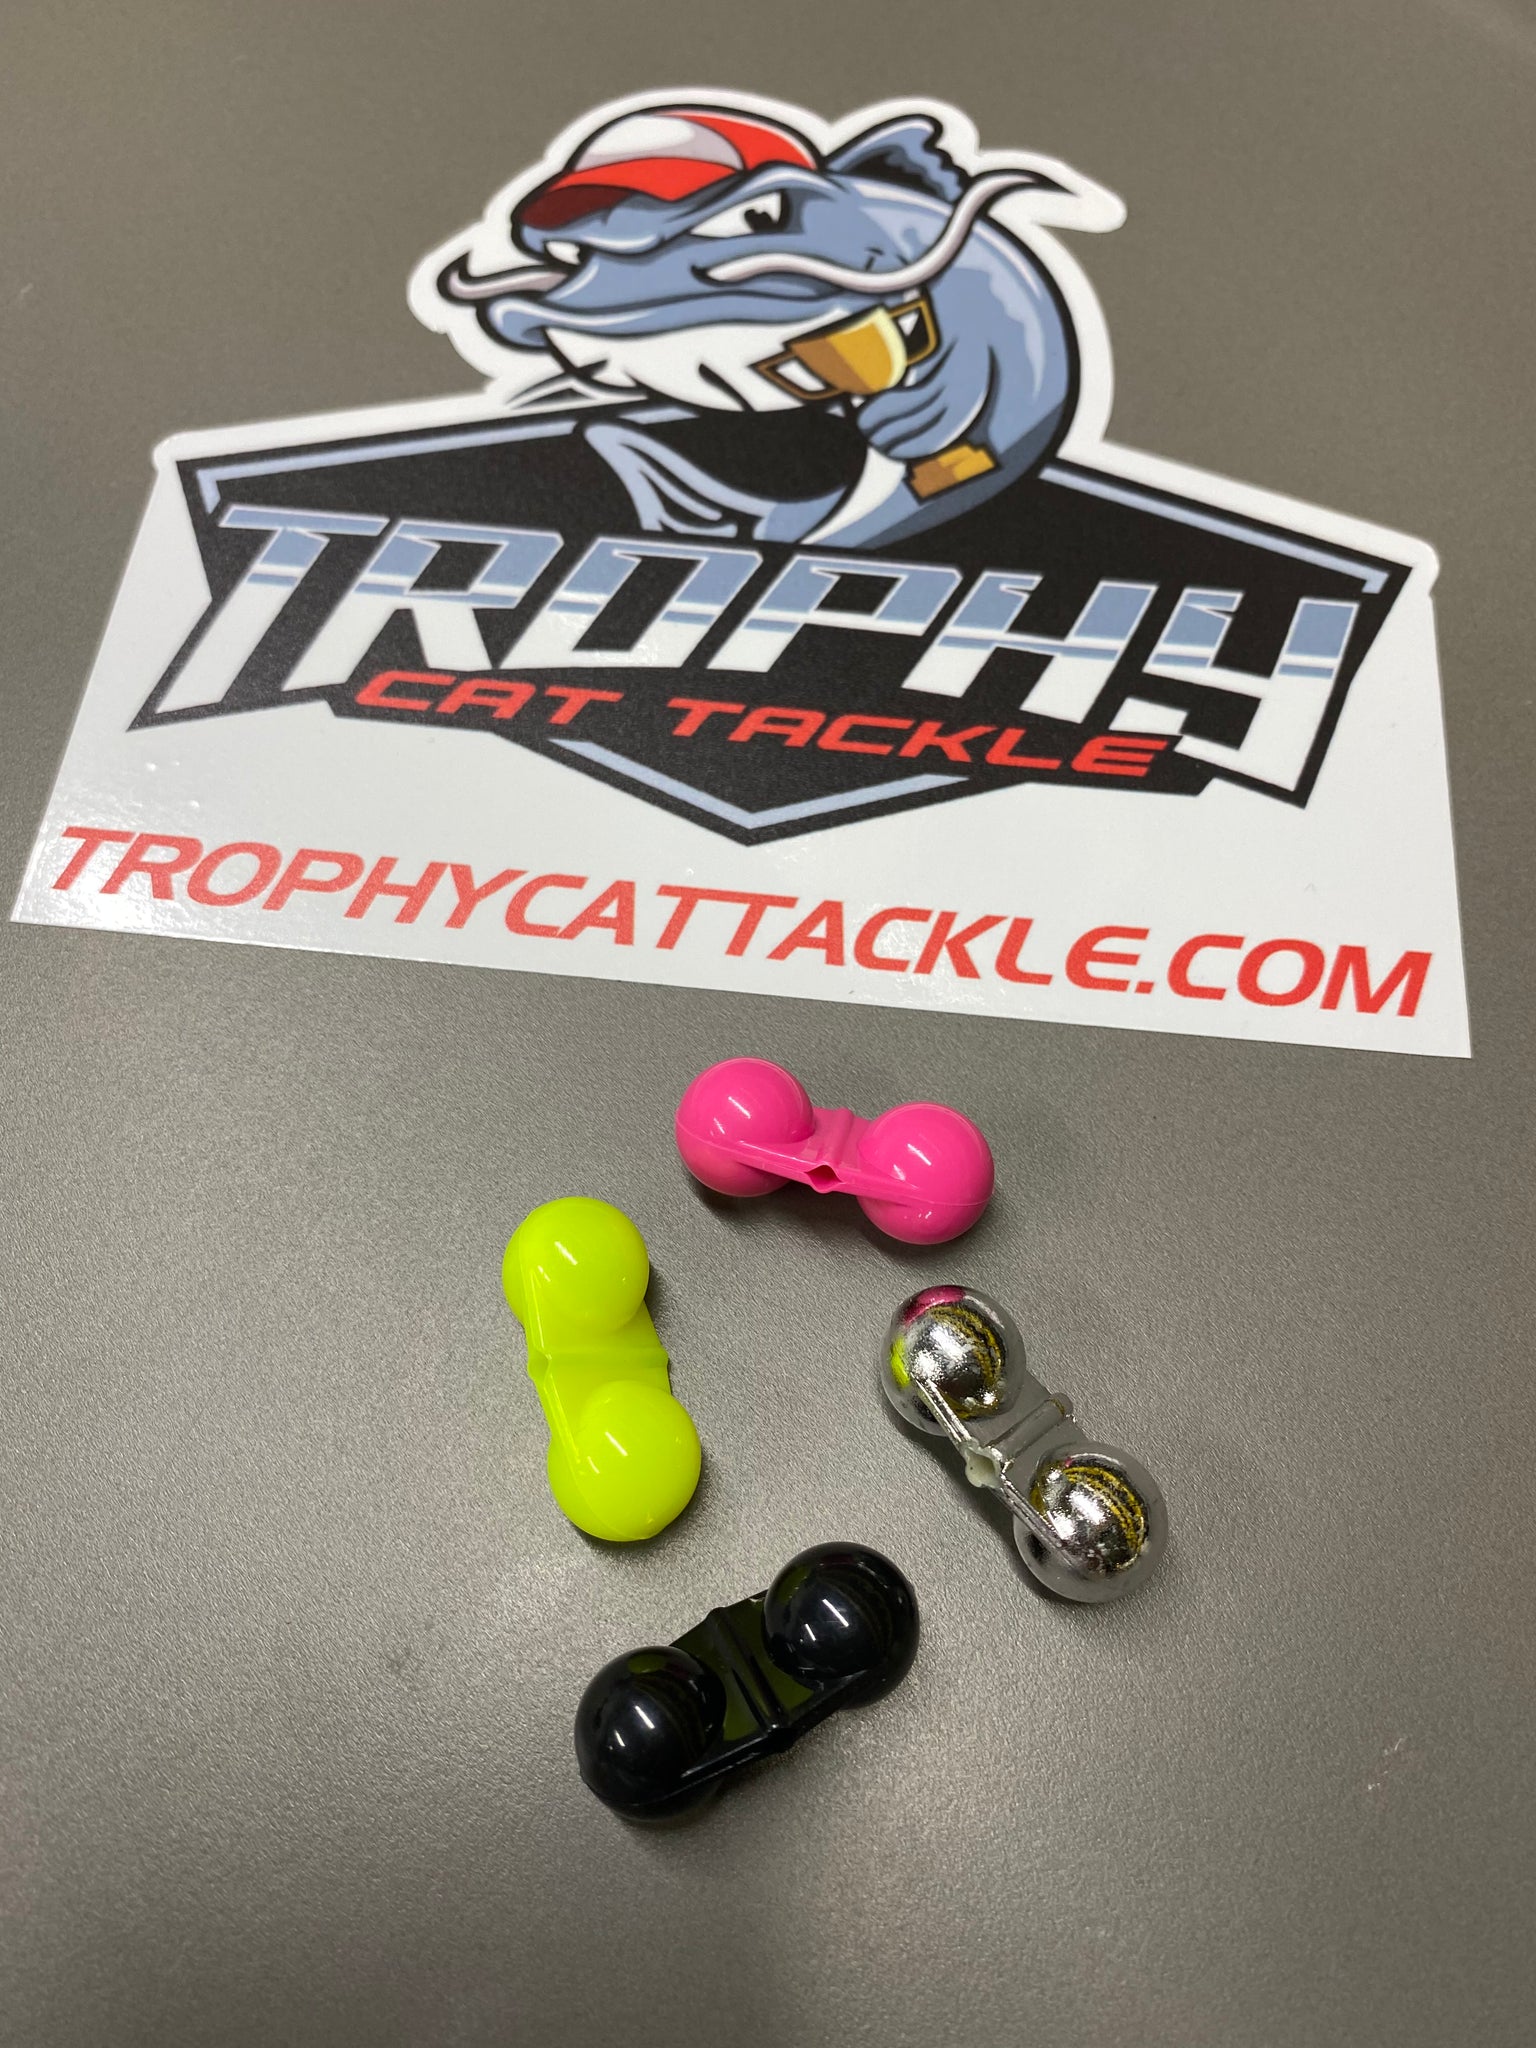 Introducing New Colors of Versa-Rattle Catfish Rig Rattles!